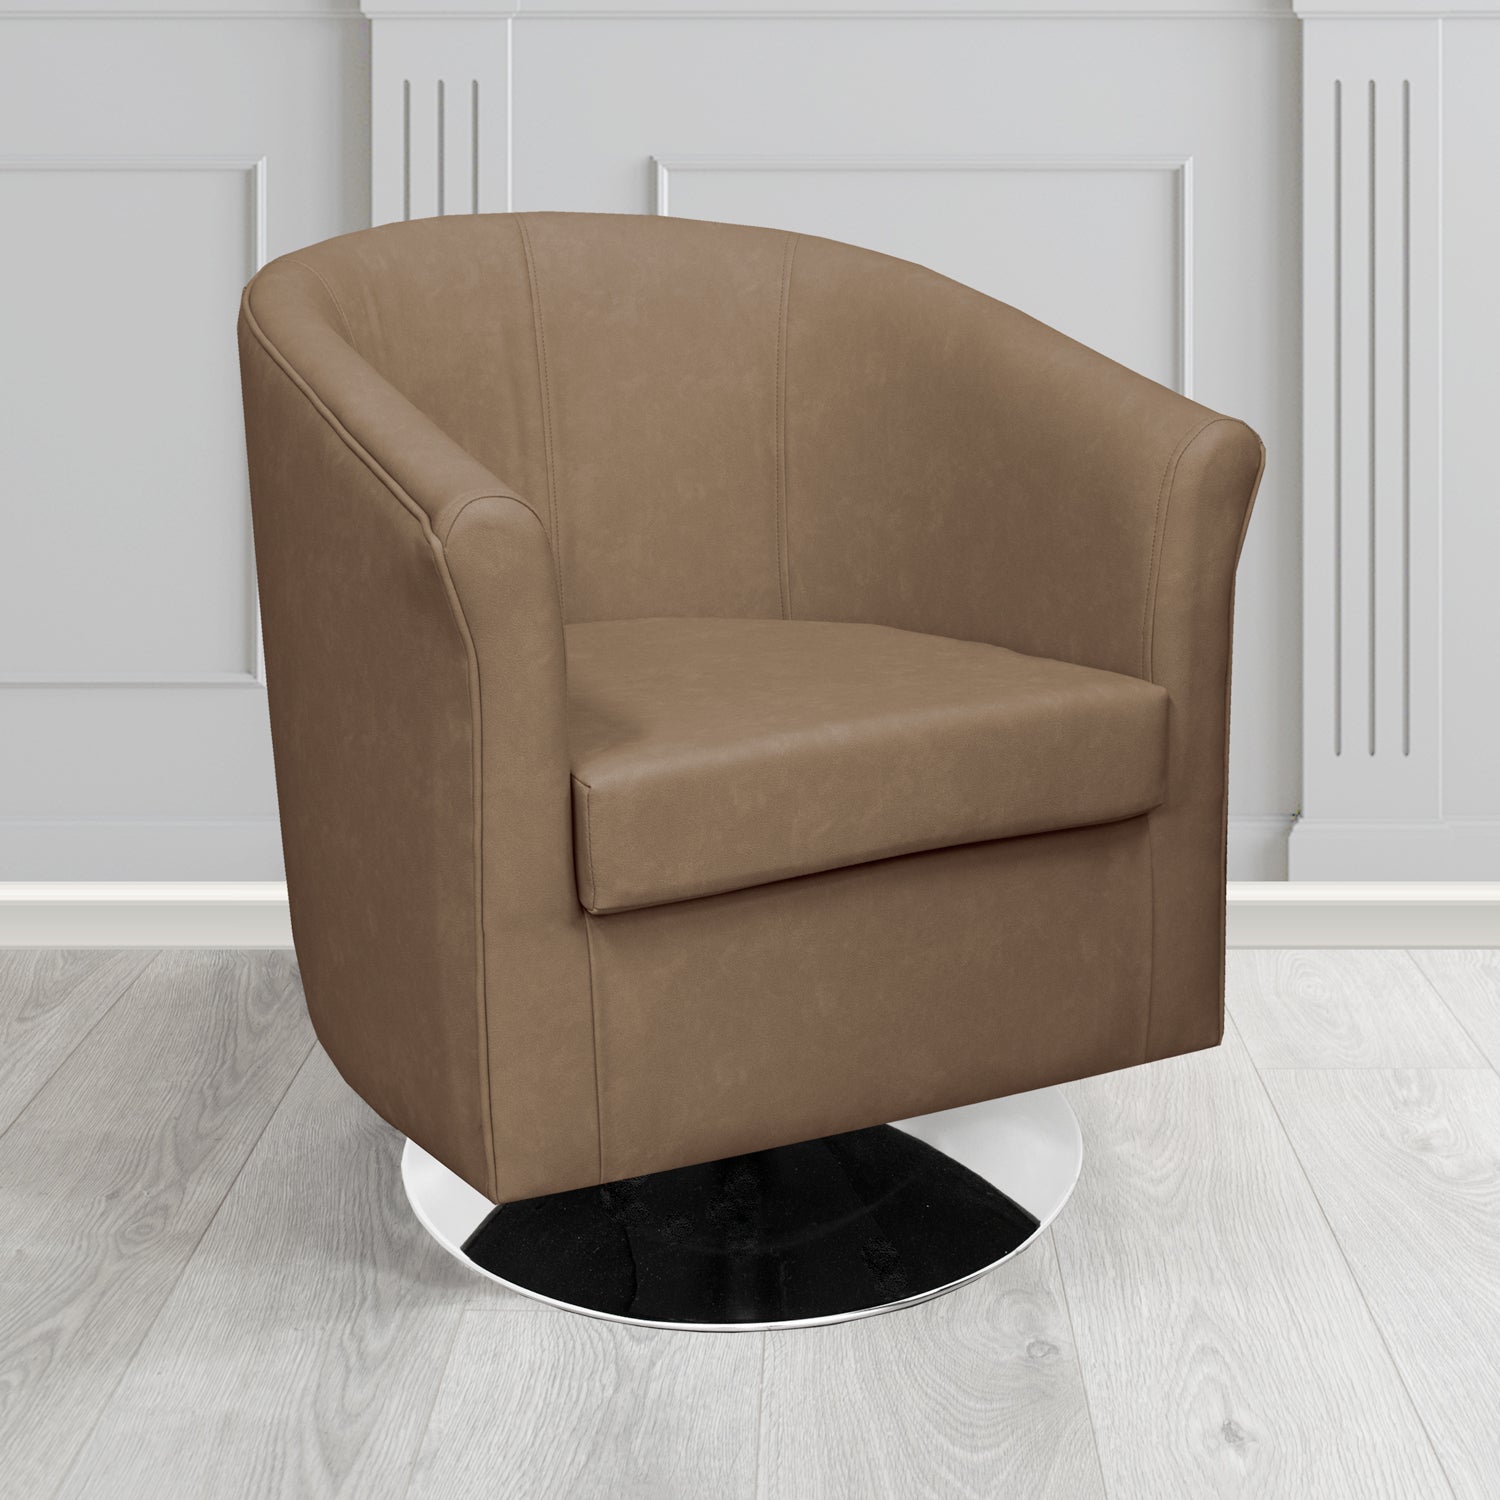 Tuscany Swivel Tub Chair in Infiniti Truffle INF1848 Antimicrobial Crib 5 Faux Leather - The Tub Chair Shop